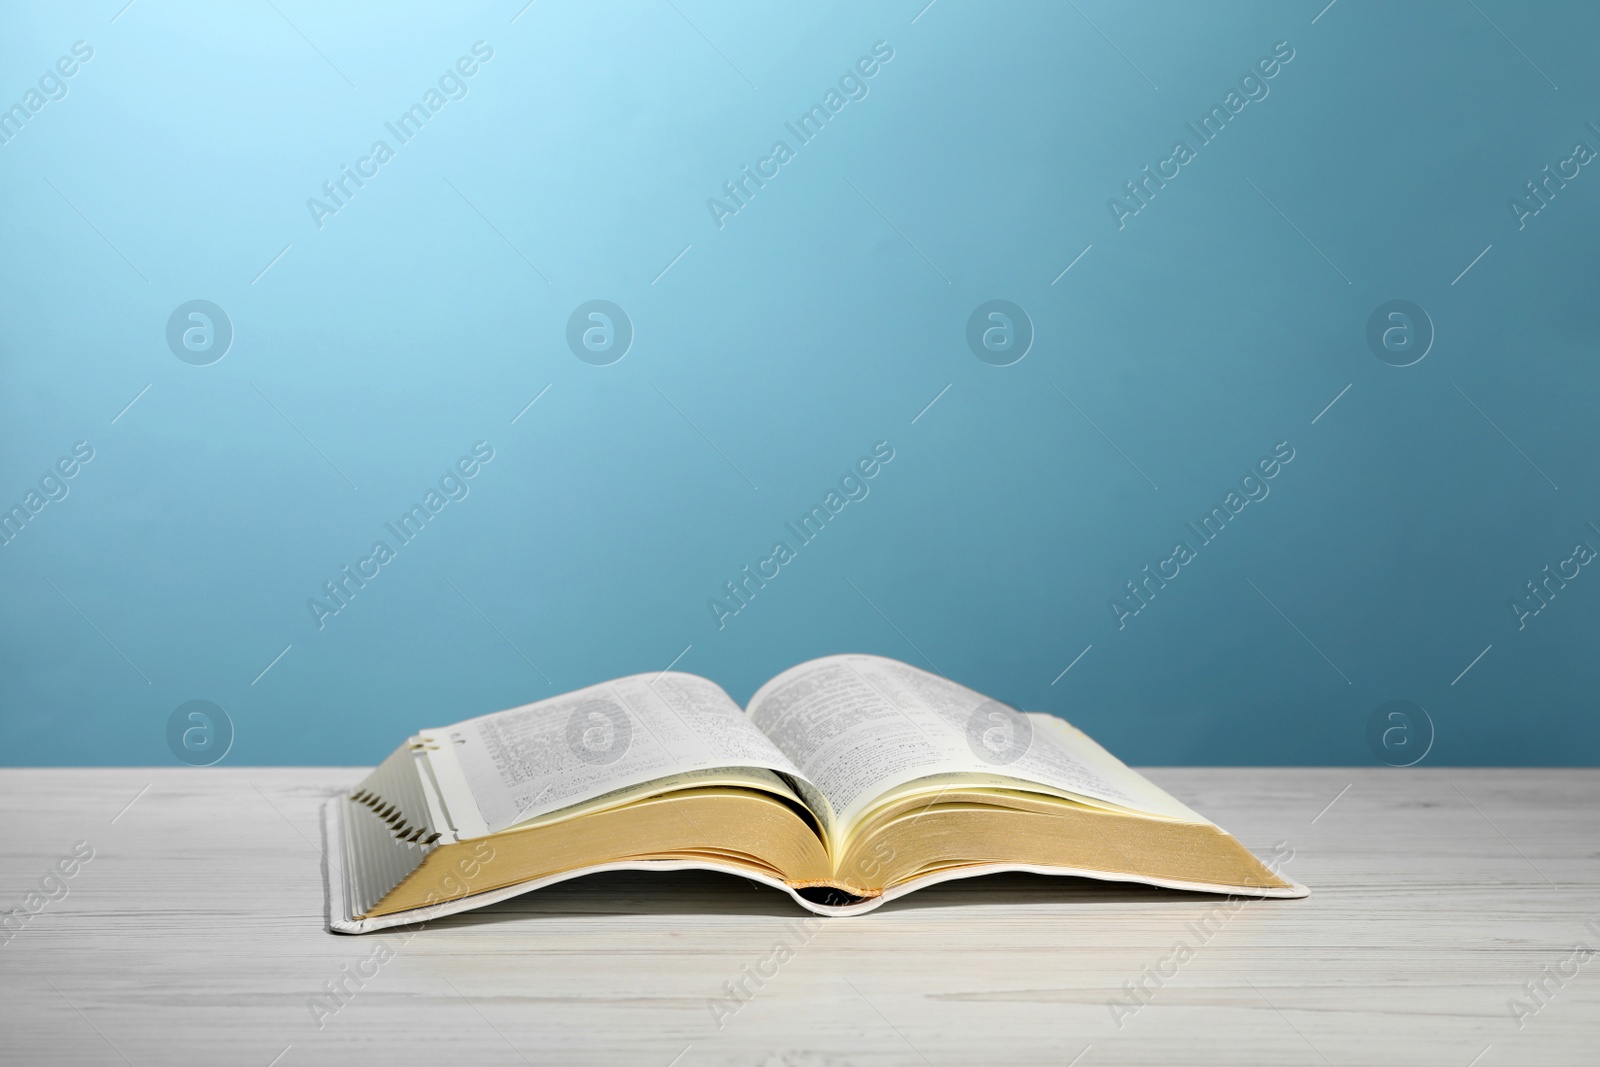 Photo of Open Bible on white wooden table against turquoise background. Christian religious book